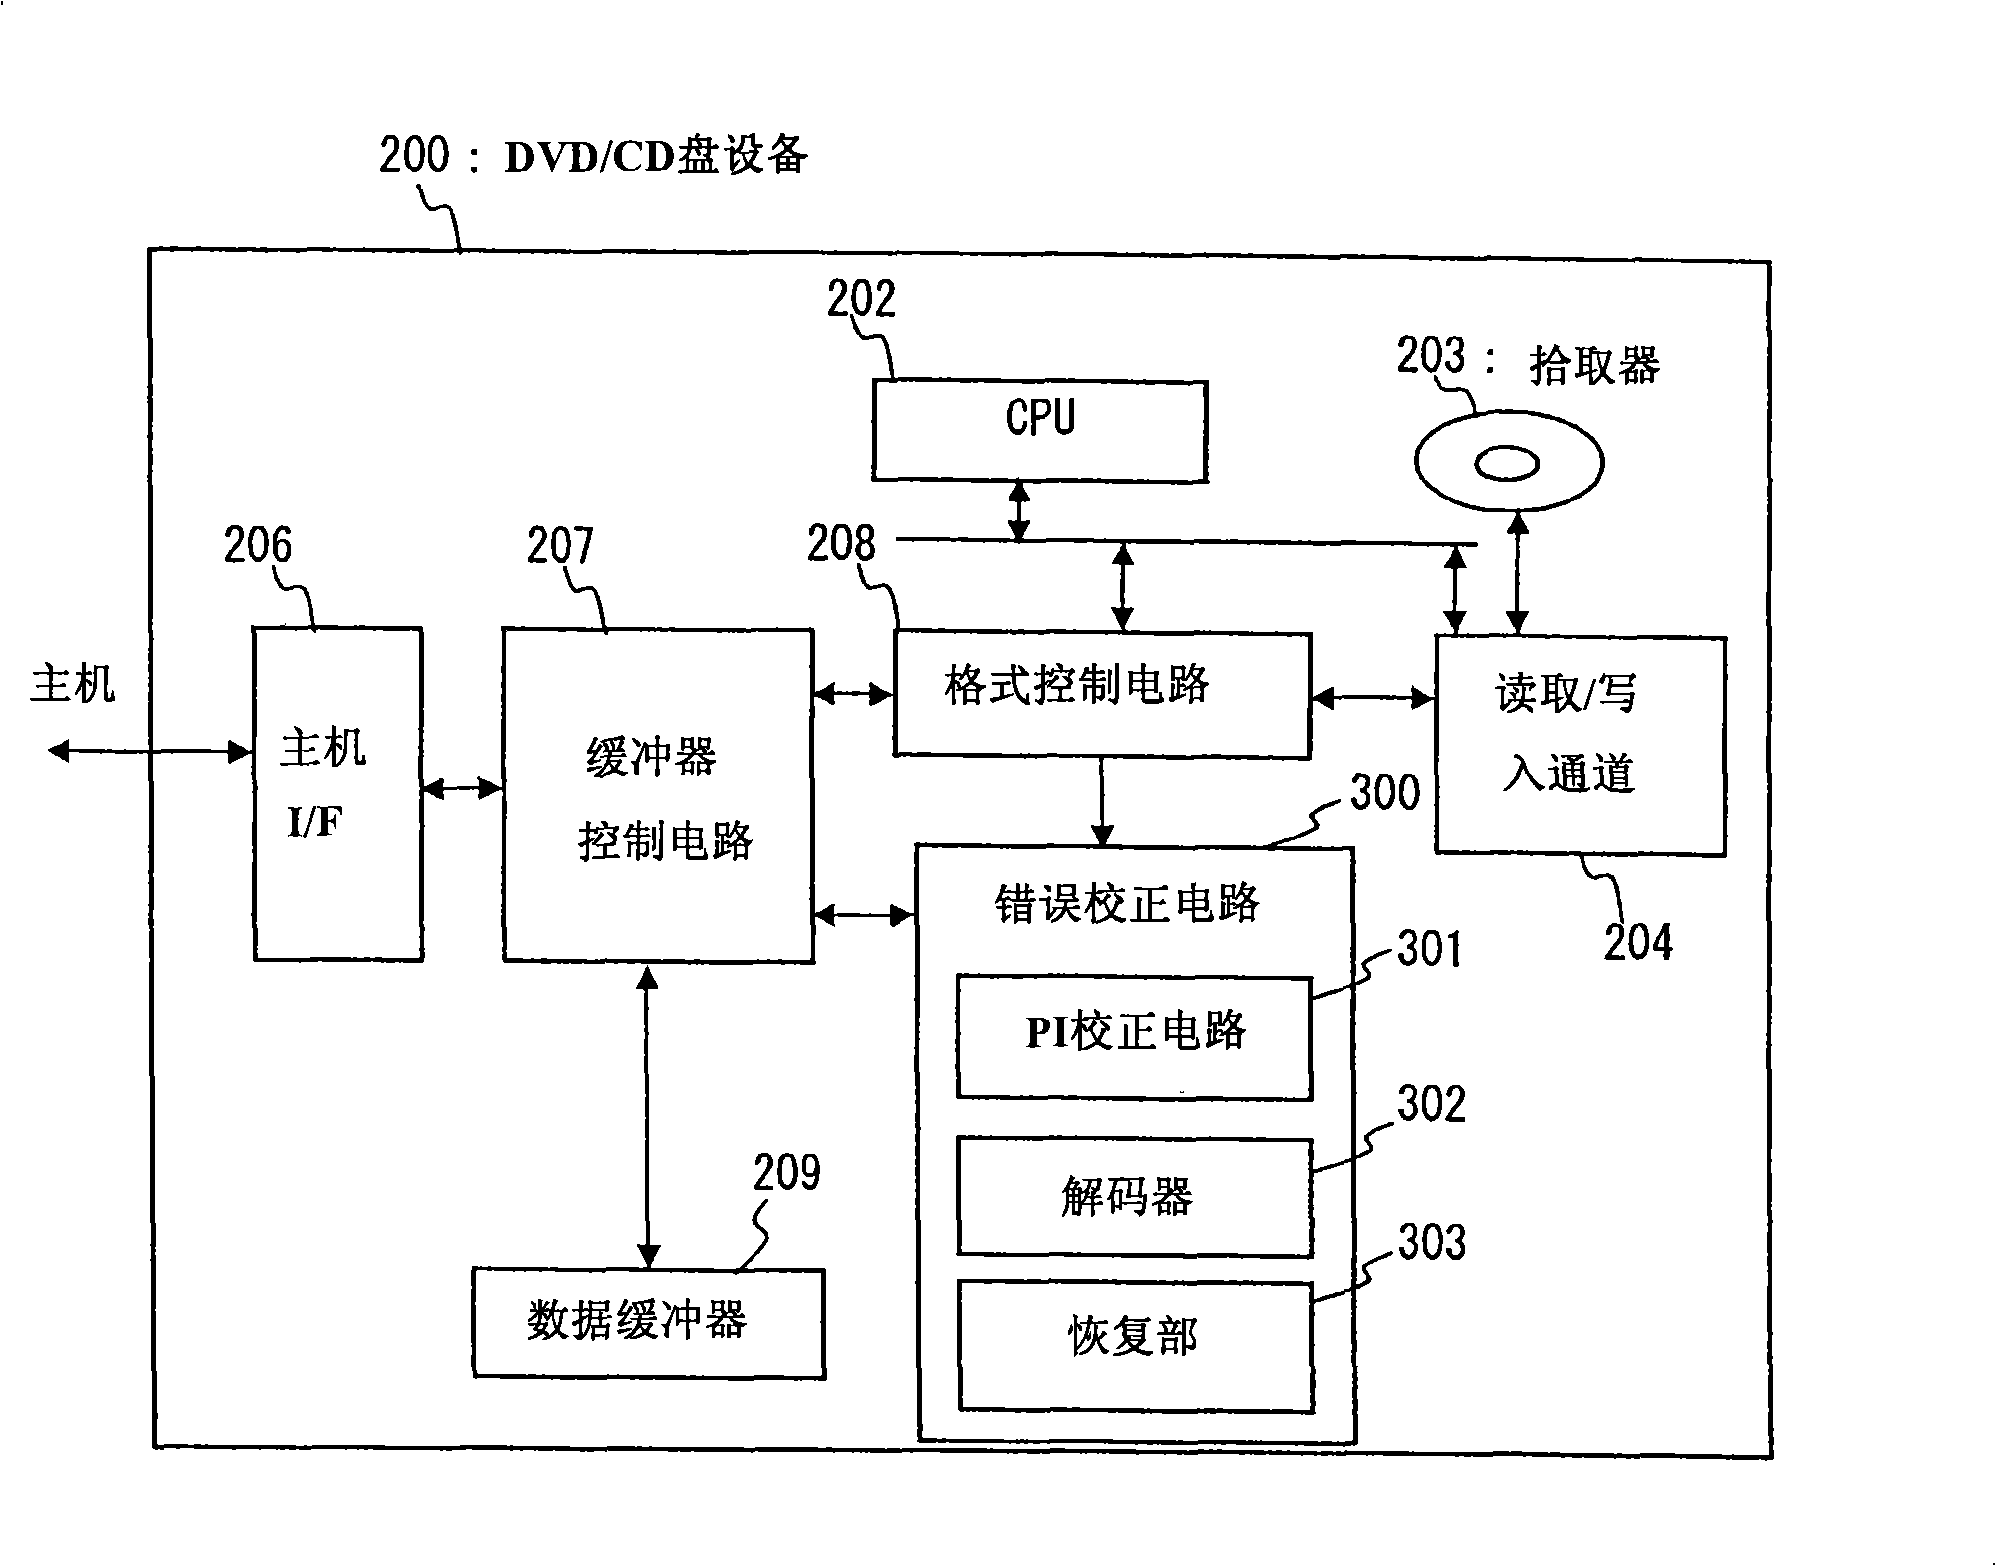 Error correction device and recording and reproducing device